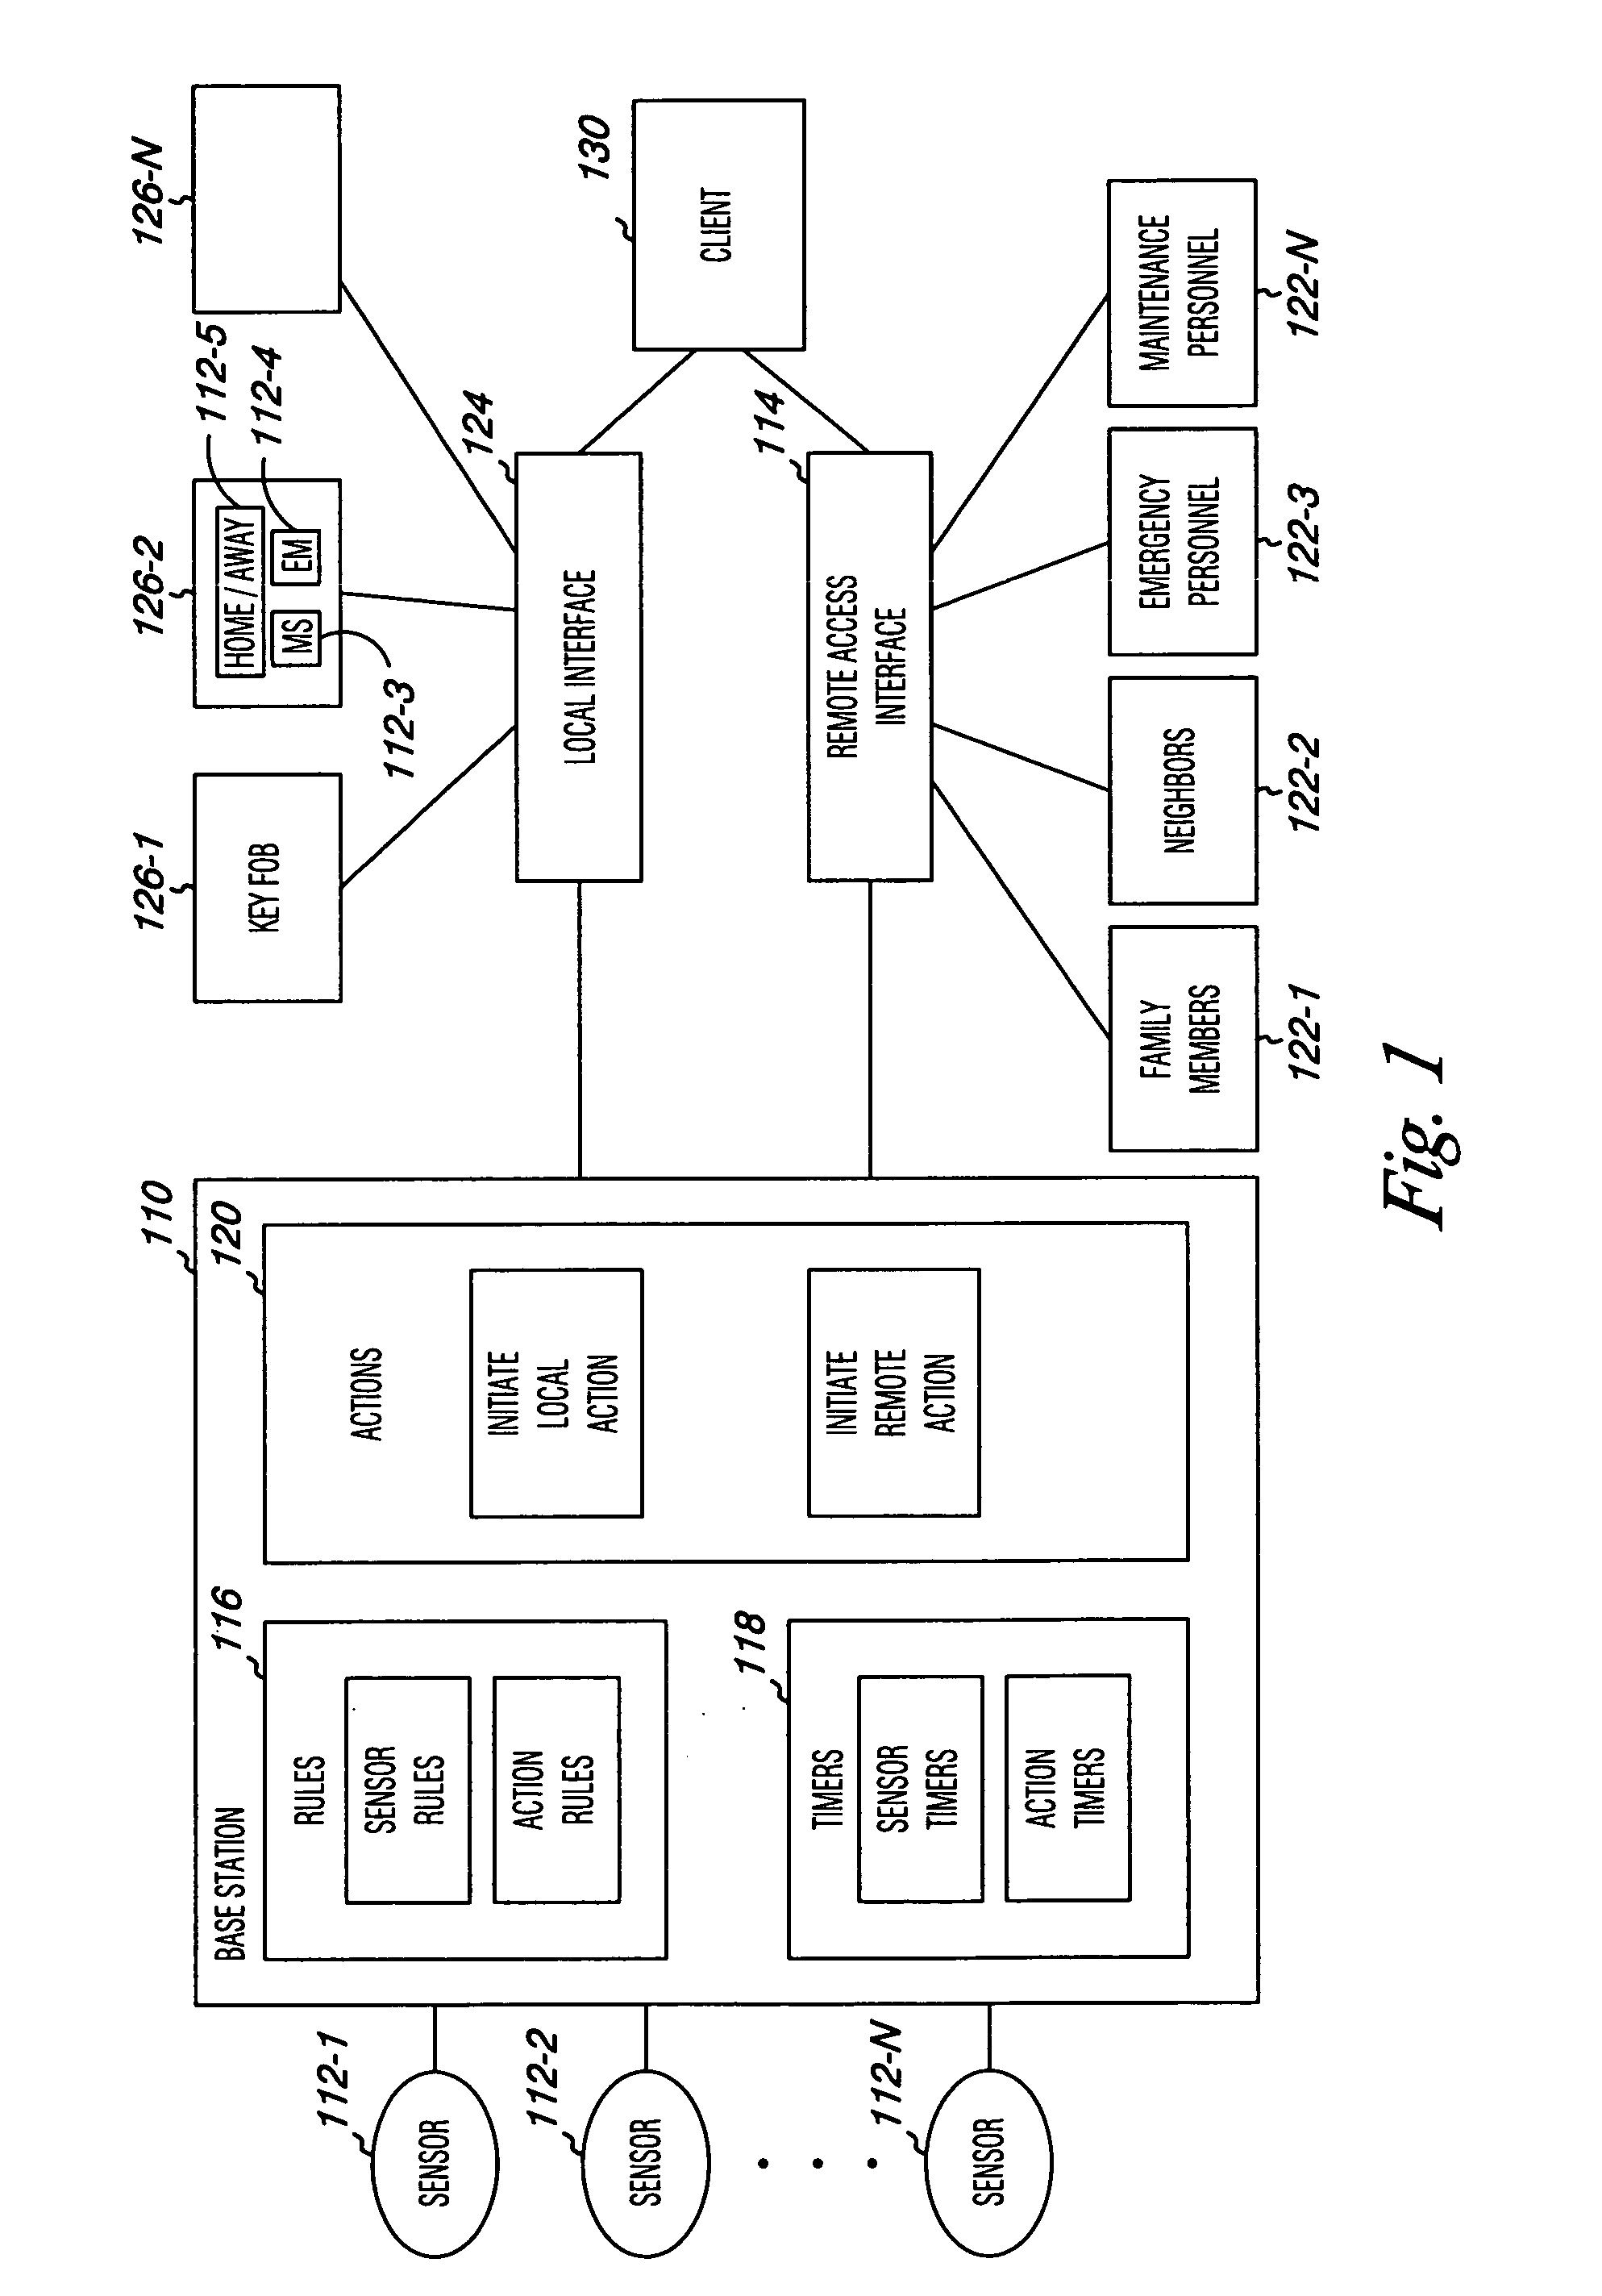 Remote device for a monitoring system